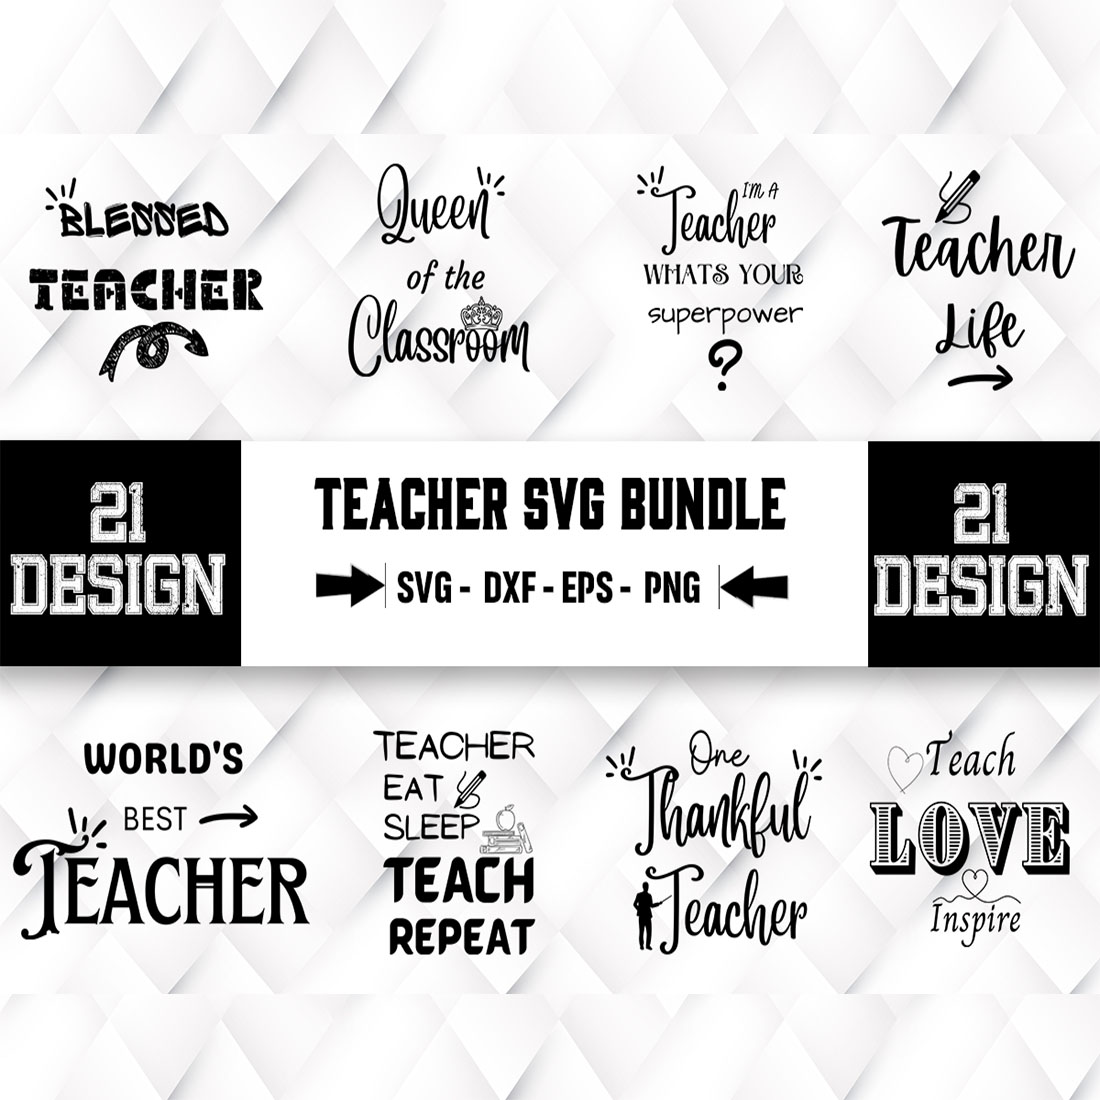 A collection of gorgeous images for teacher-themed prints